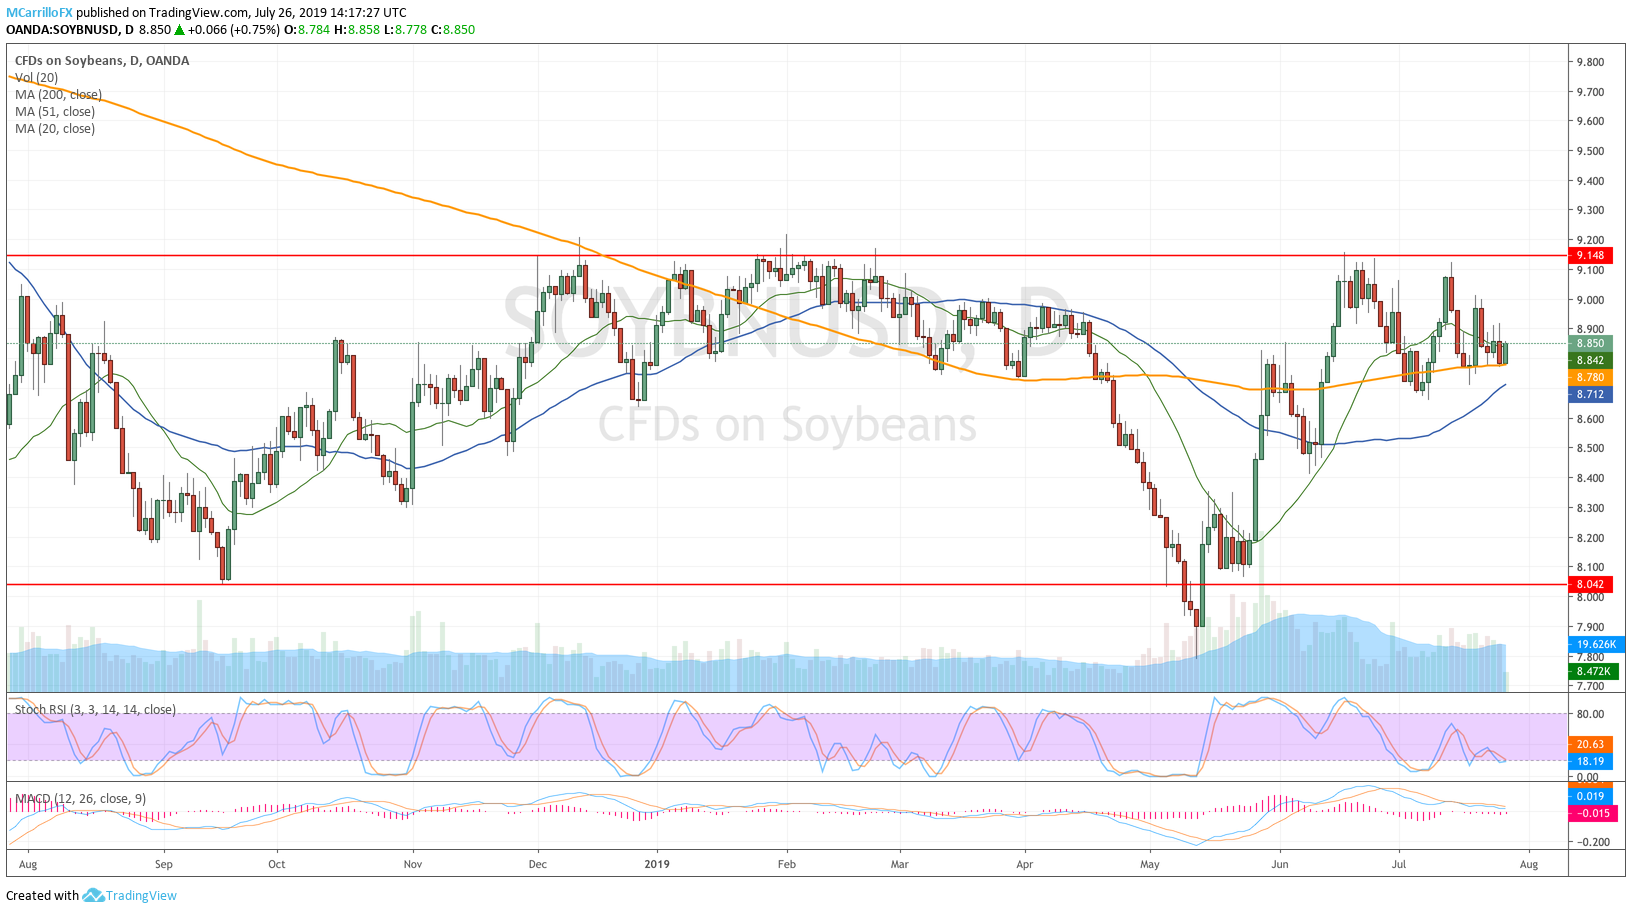 Prices of Soybean daily chart July 26